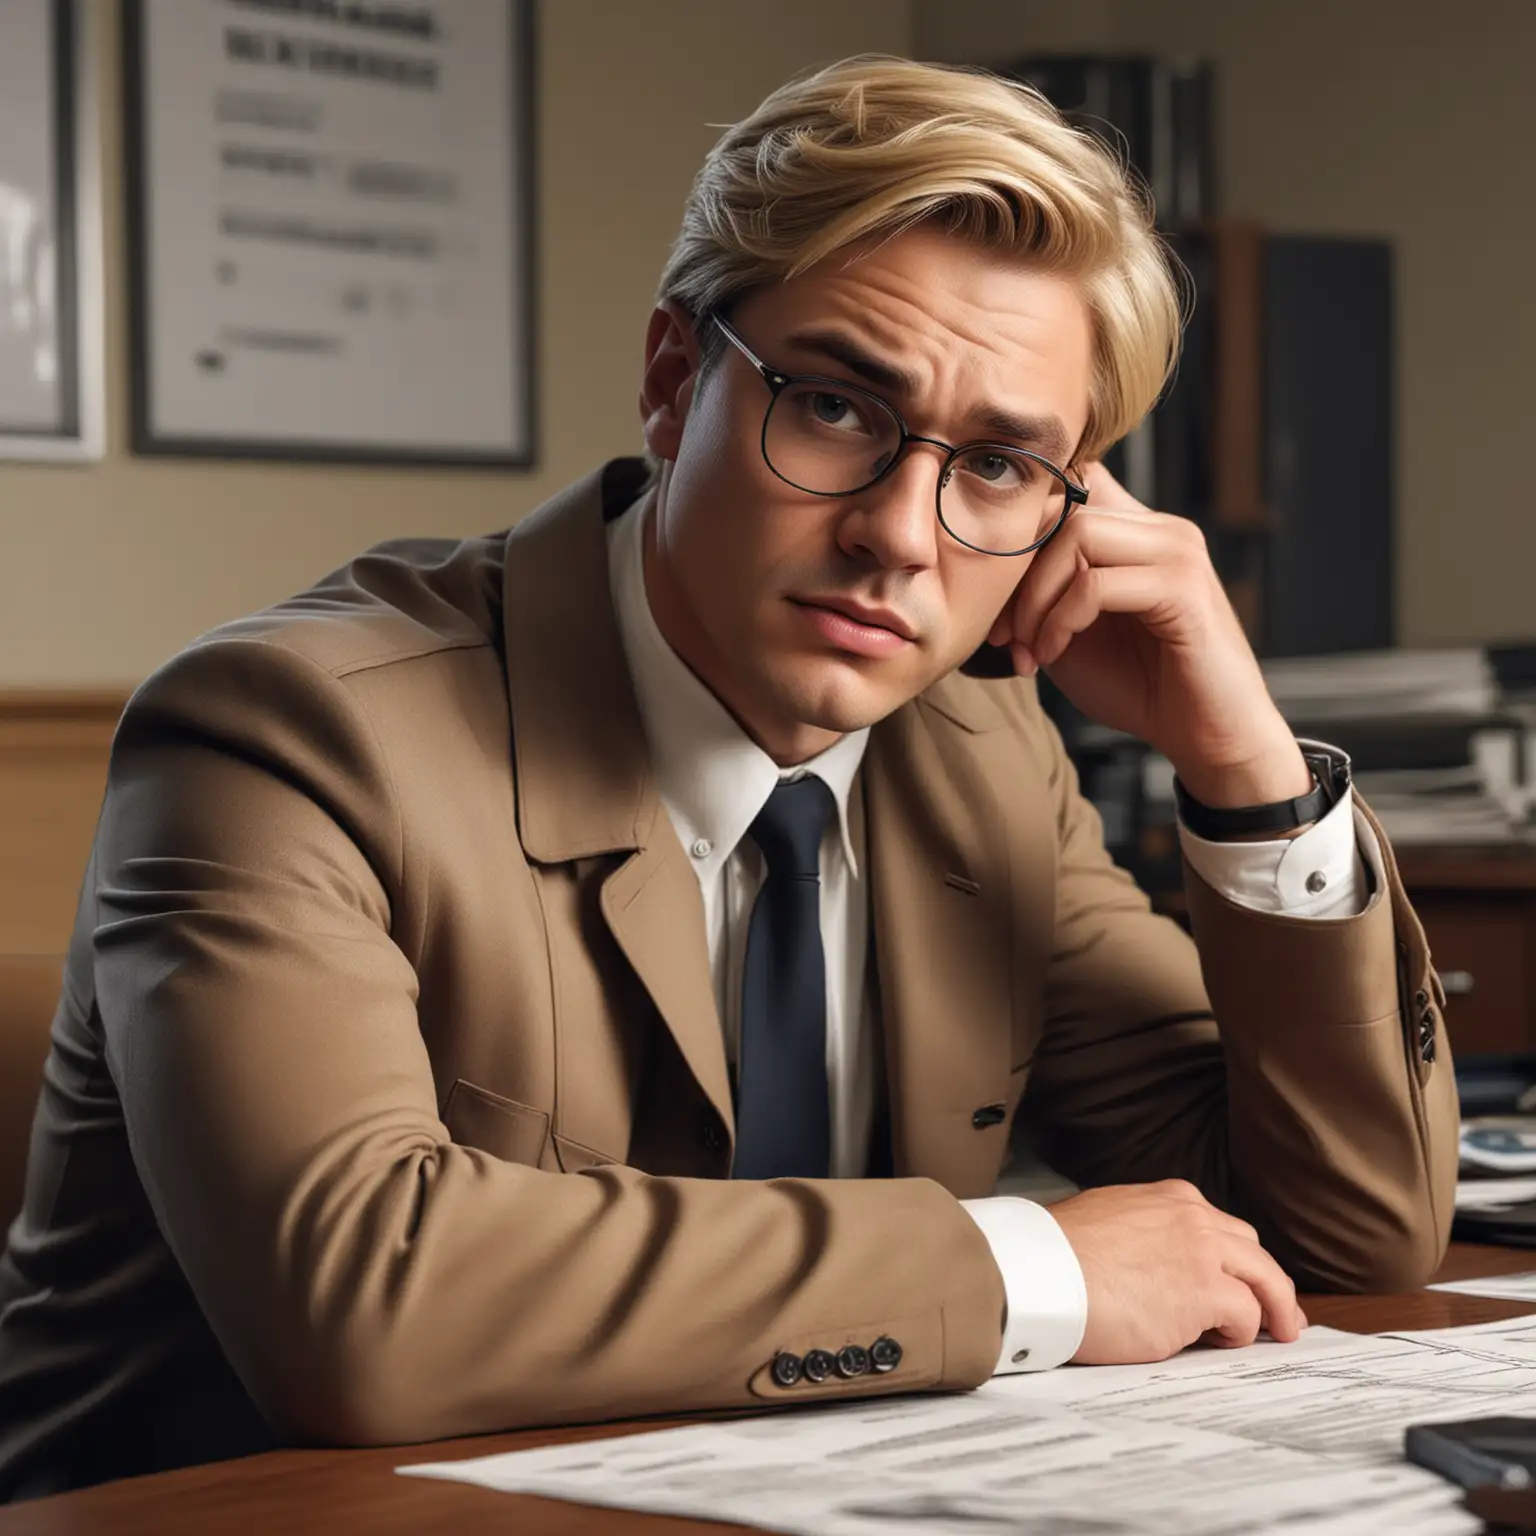 Detective in Thought BlondeHaired Male in Glasses